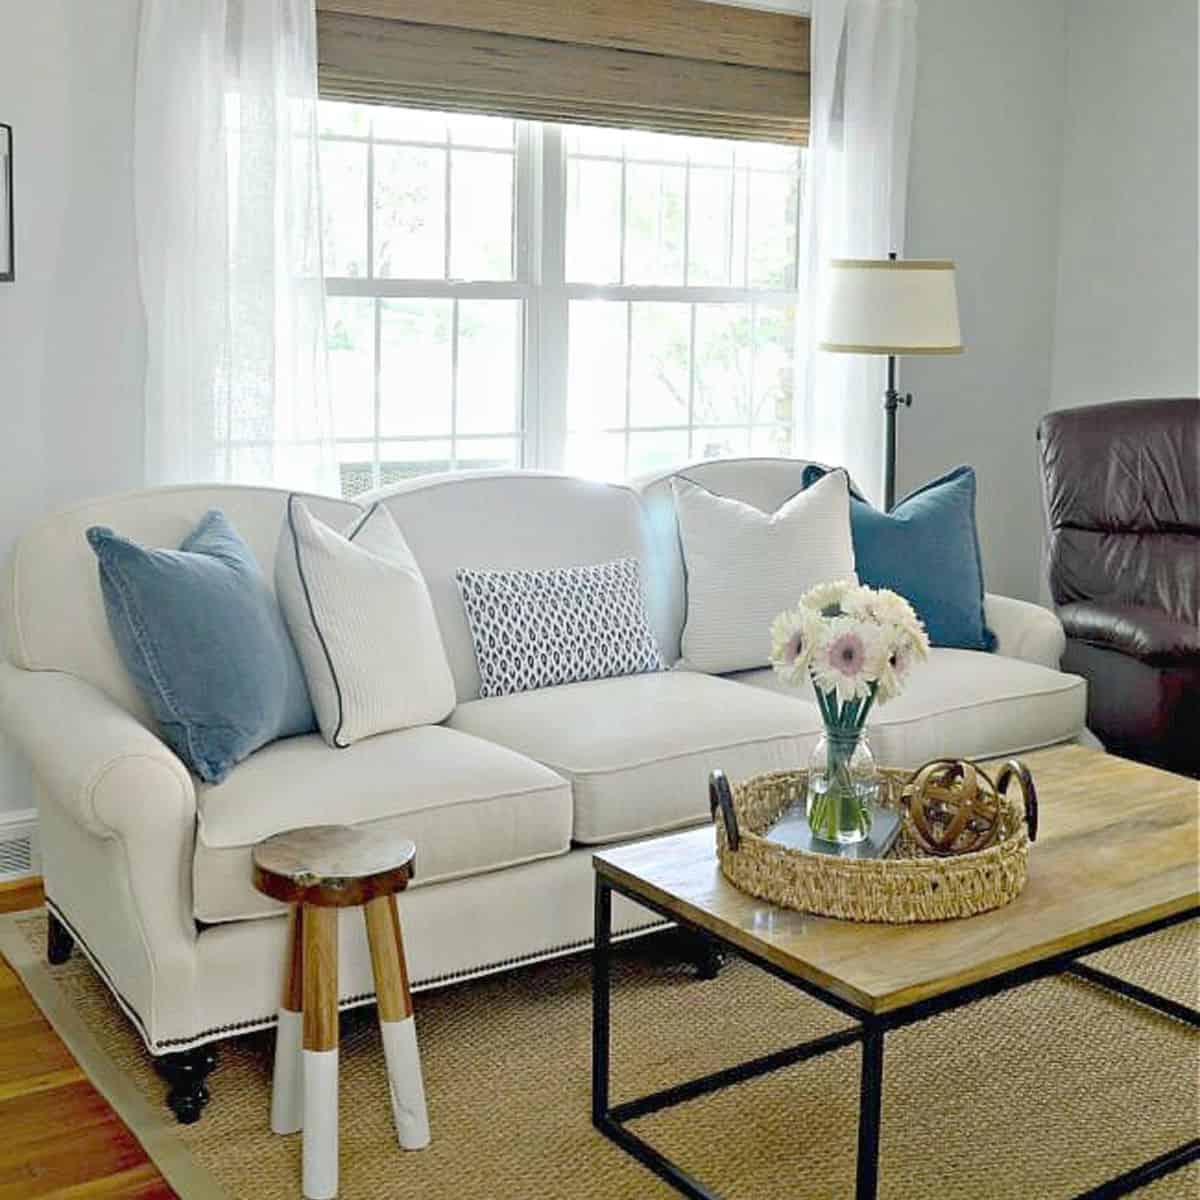 new white sofa in living room with blue and white pillows